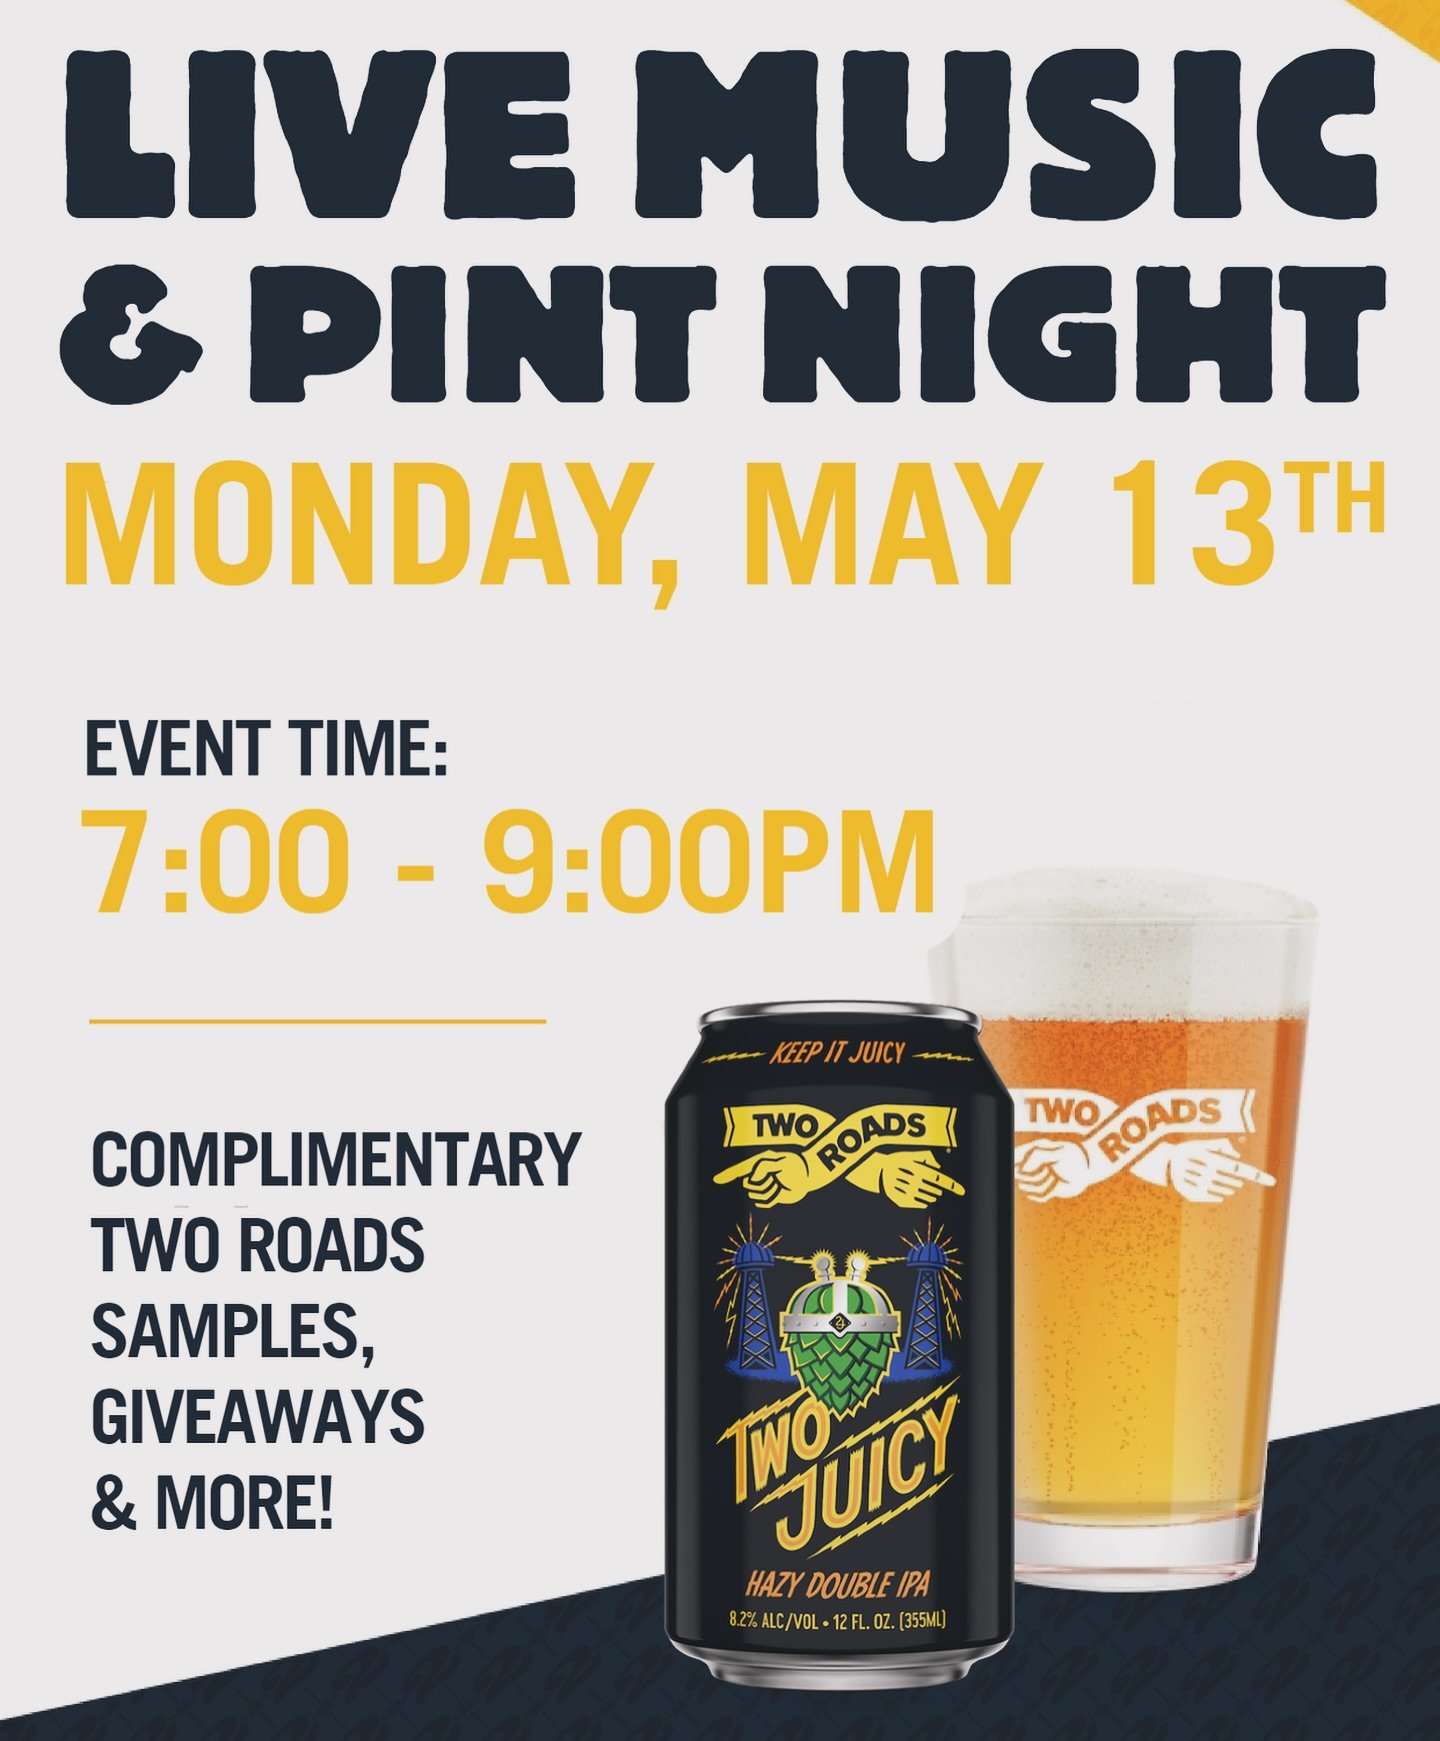 📣📣 TONIGHT 📣📣 Join us for Pint Night with free merch and Live Music sponsored by our friends at @tworoadsbrewing ✌🏼✌🏼❤️❤️